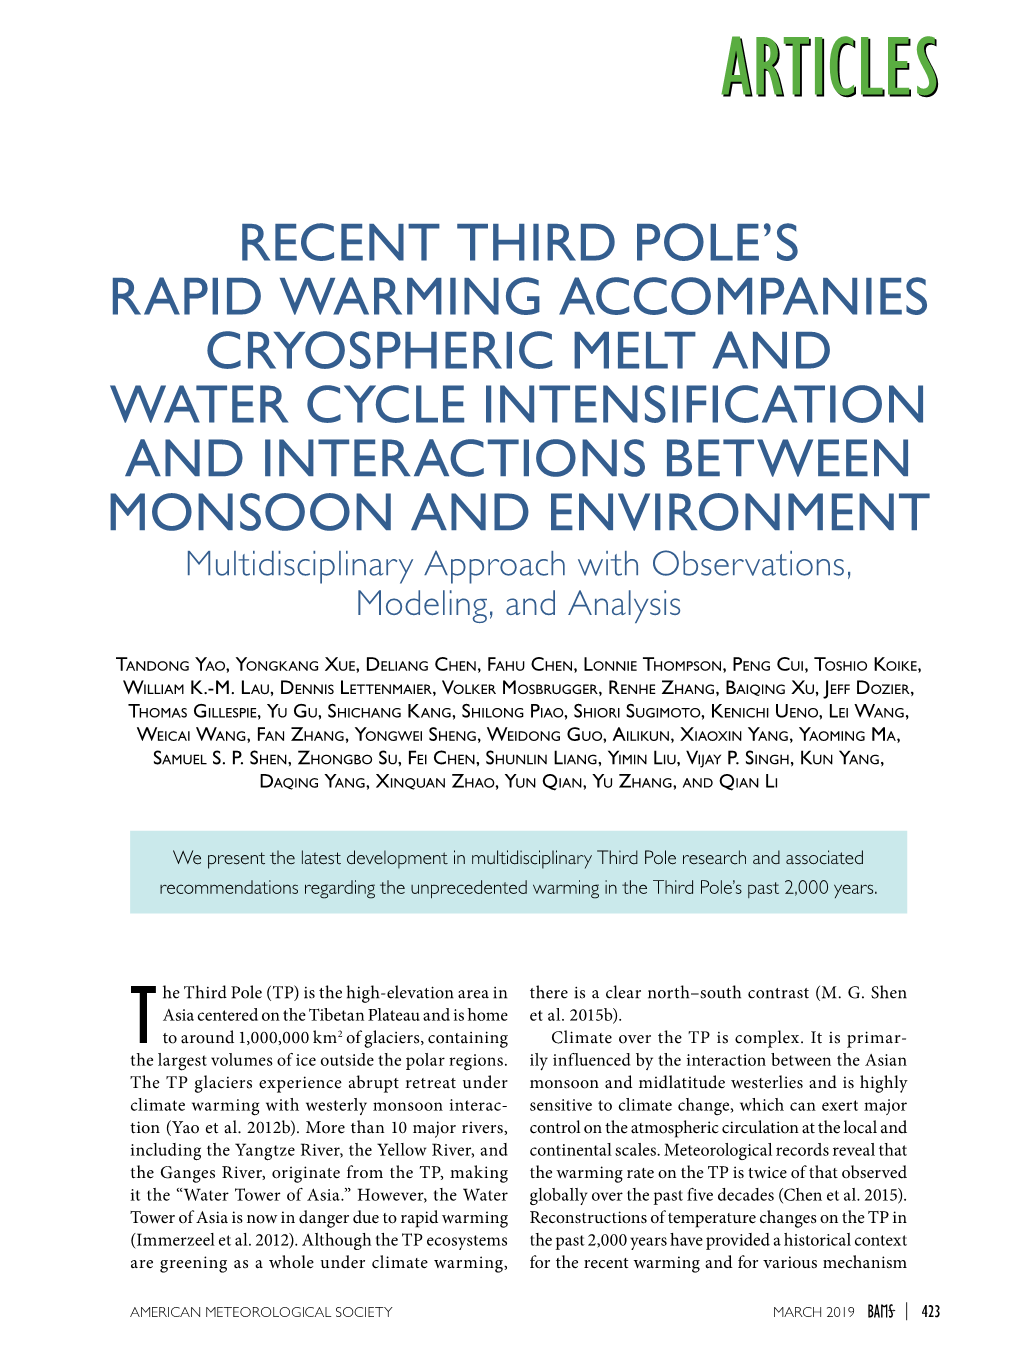 Recent Third Pole's Rapid Warming Accompanies Cryospheric Melt and Water Cycle Intensification and Interactions Between Monsoon